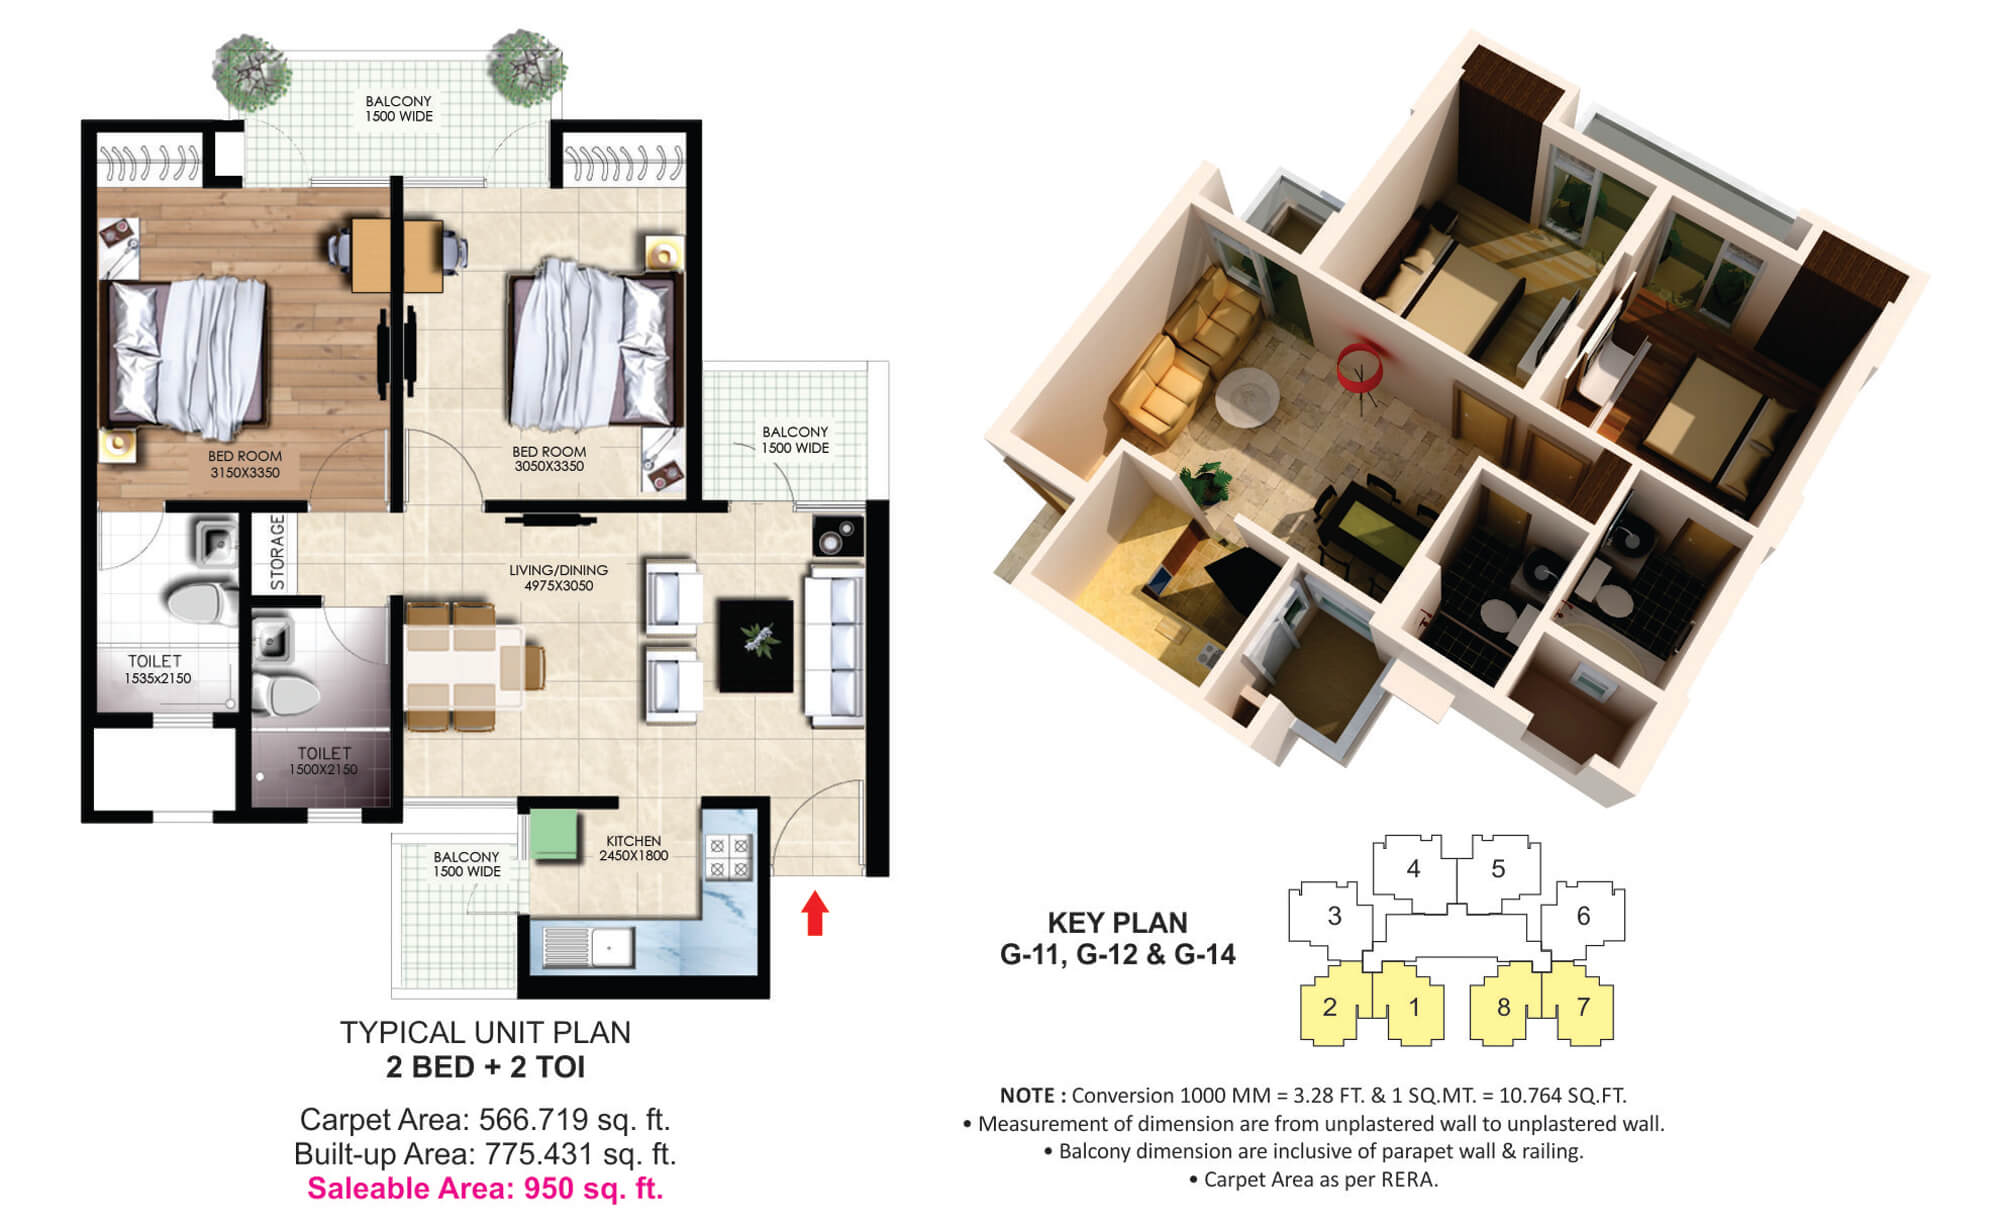 The floor plan size of 2 BHK Flat is 950 sq ft.